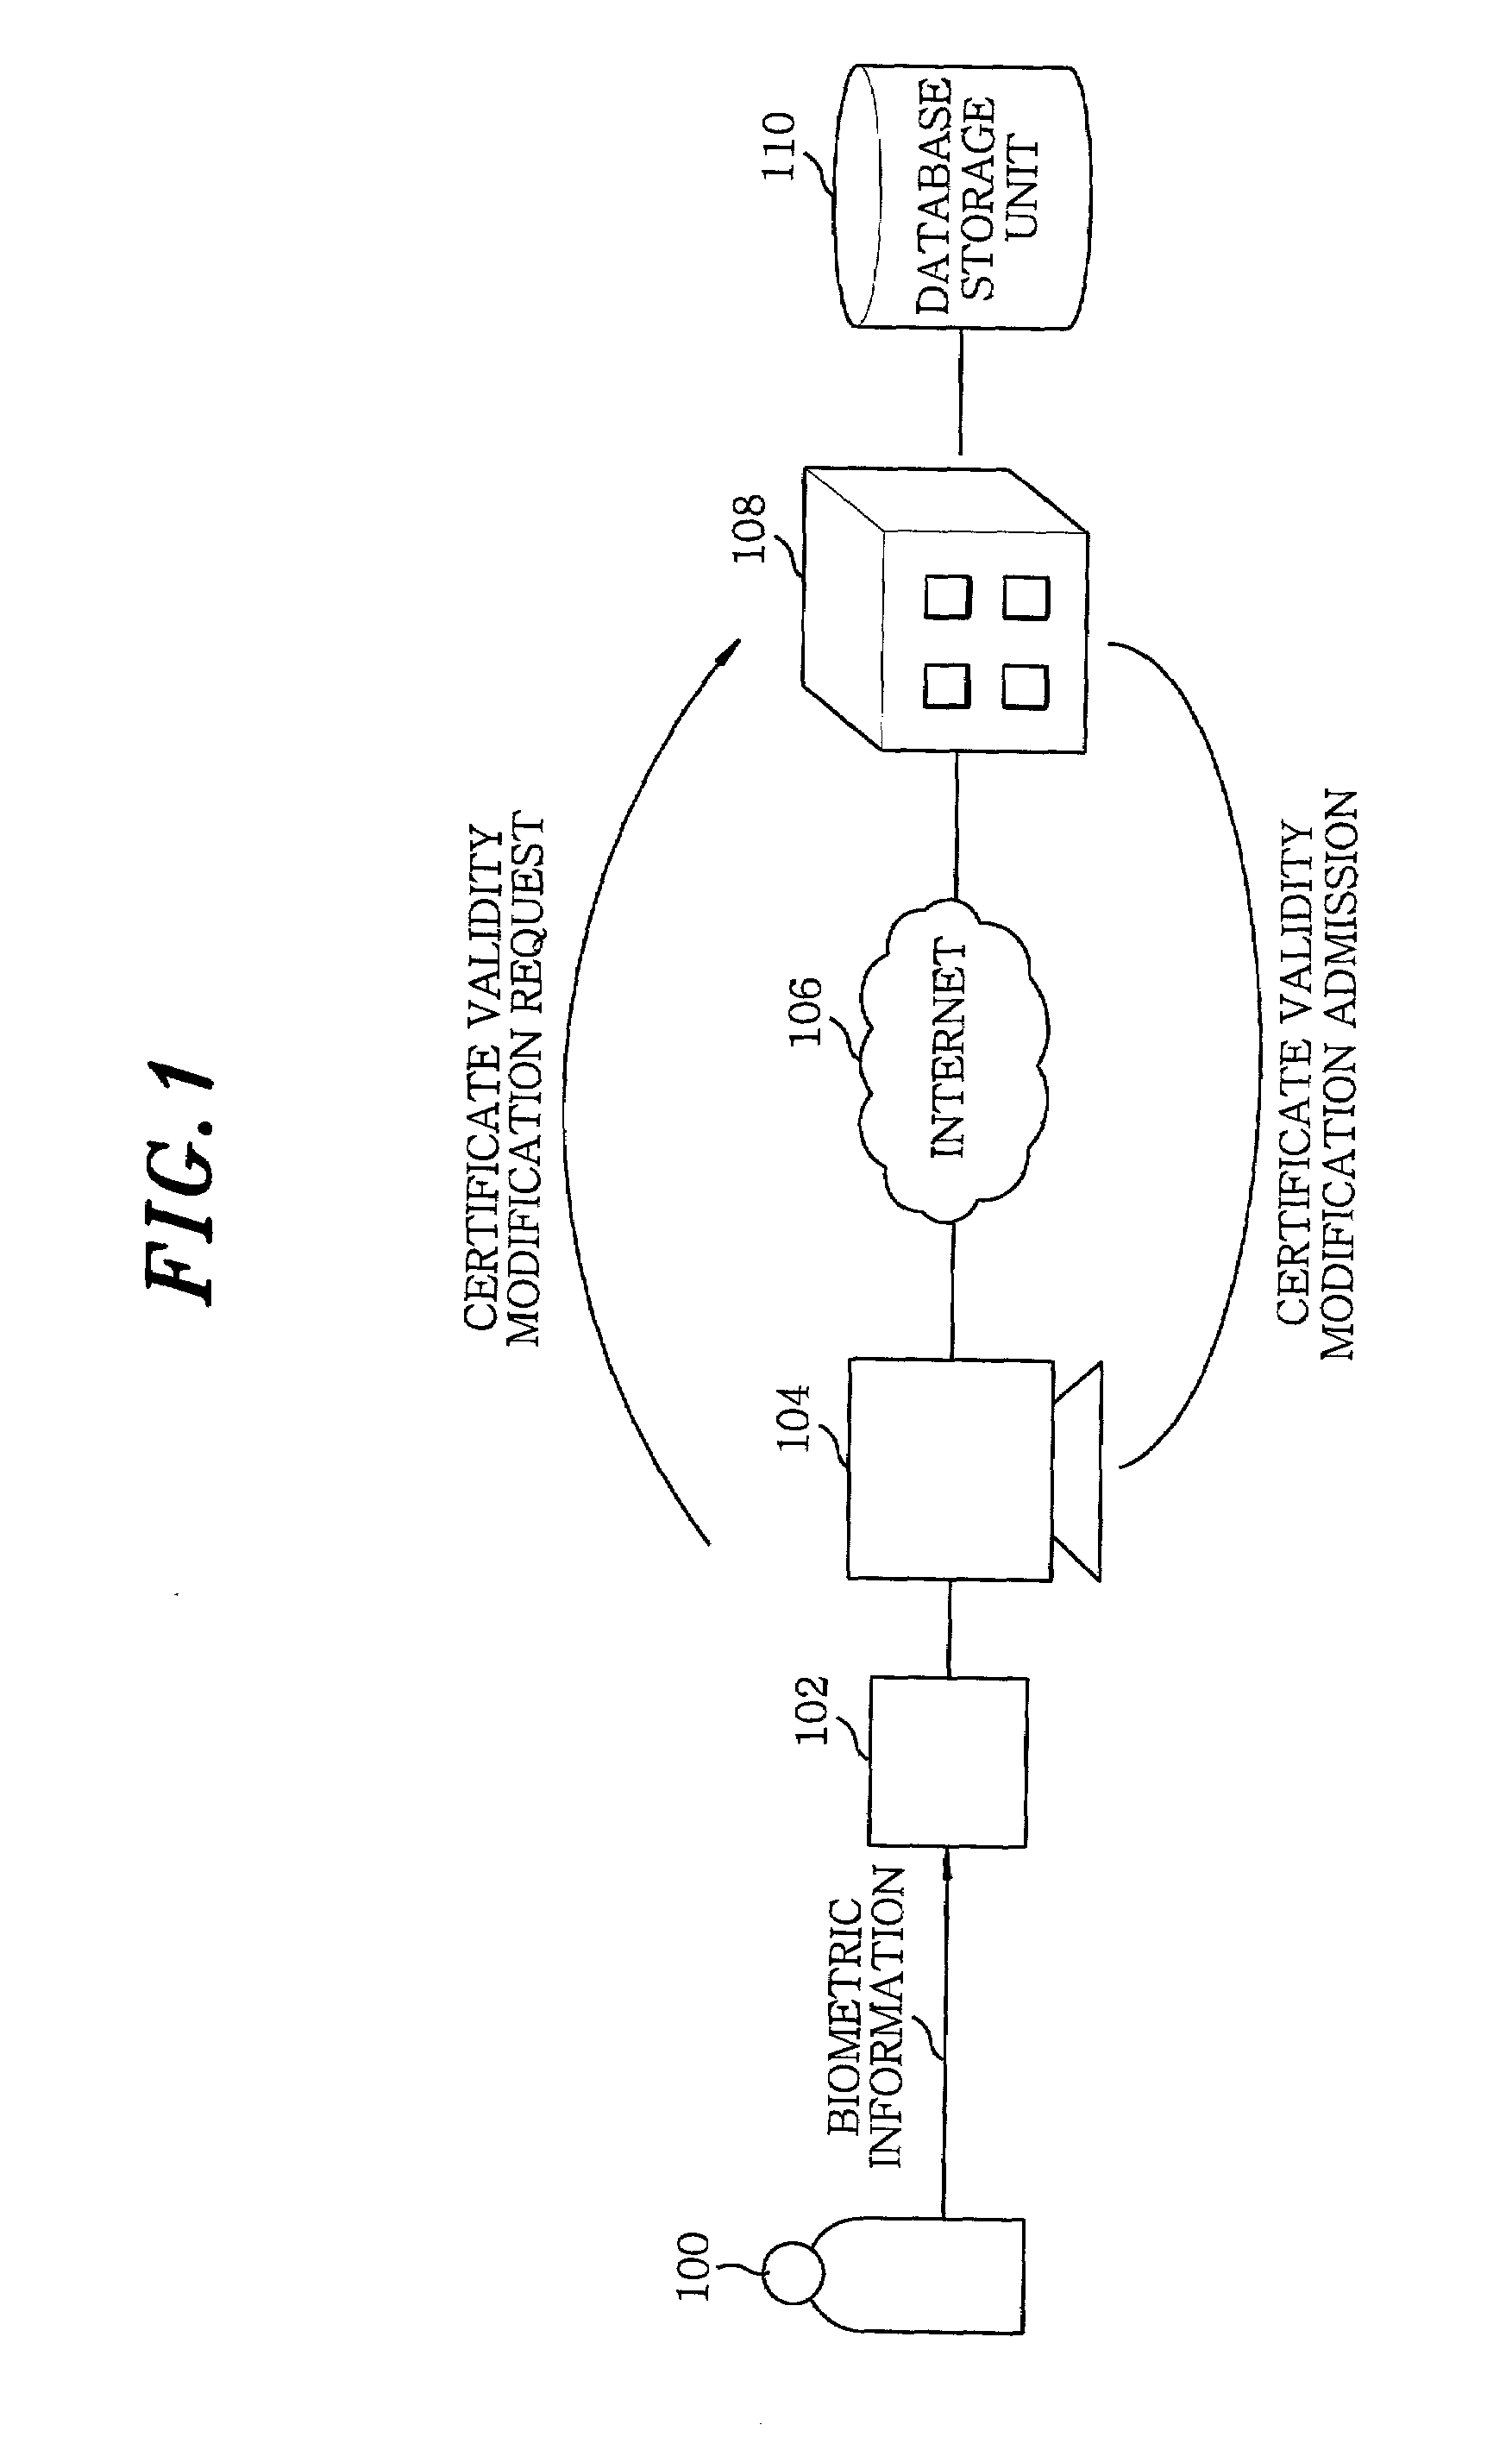 Method for modifying validity of a certificate using biometric information in public key infrastructure-based authentication system